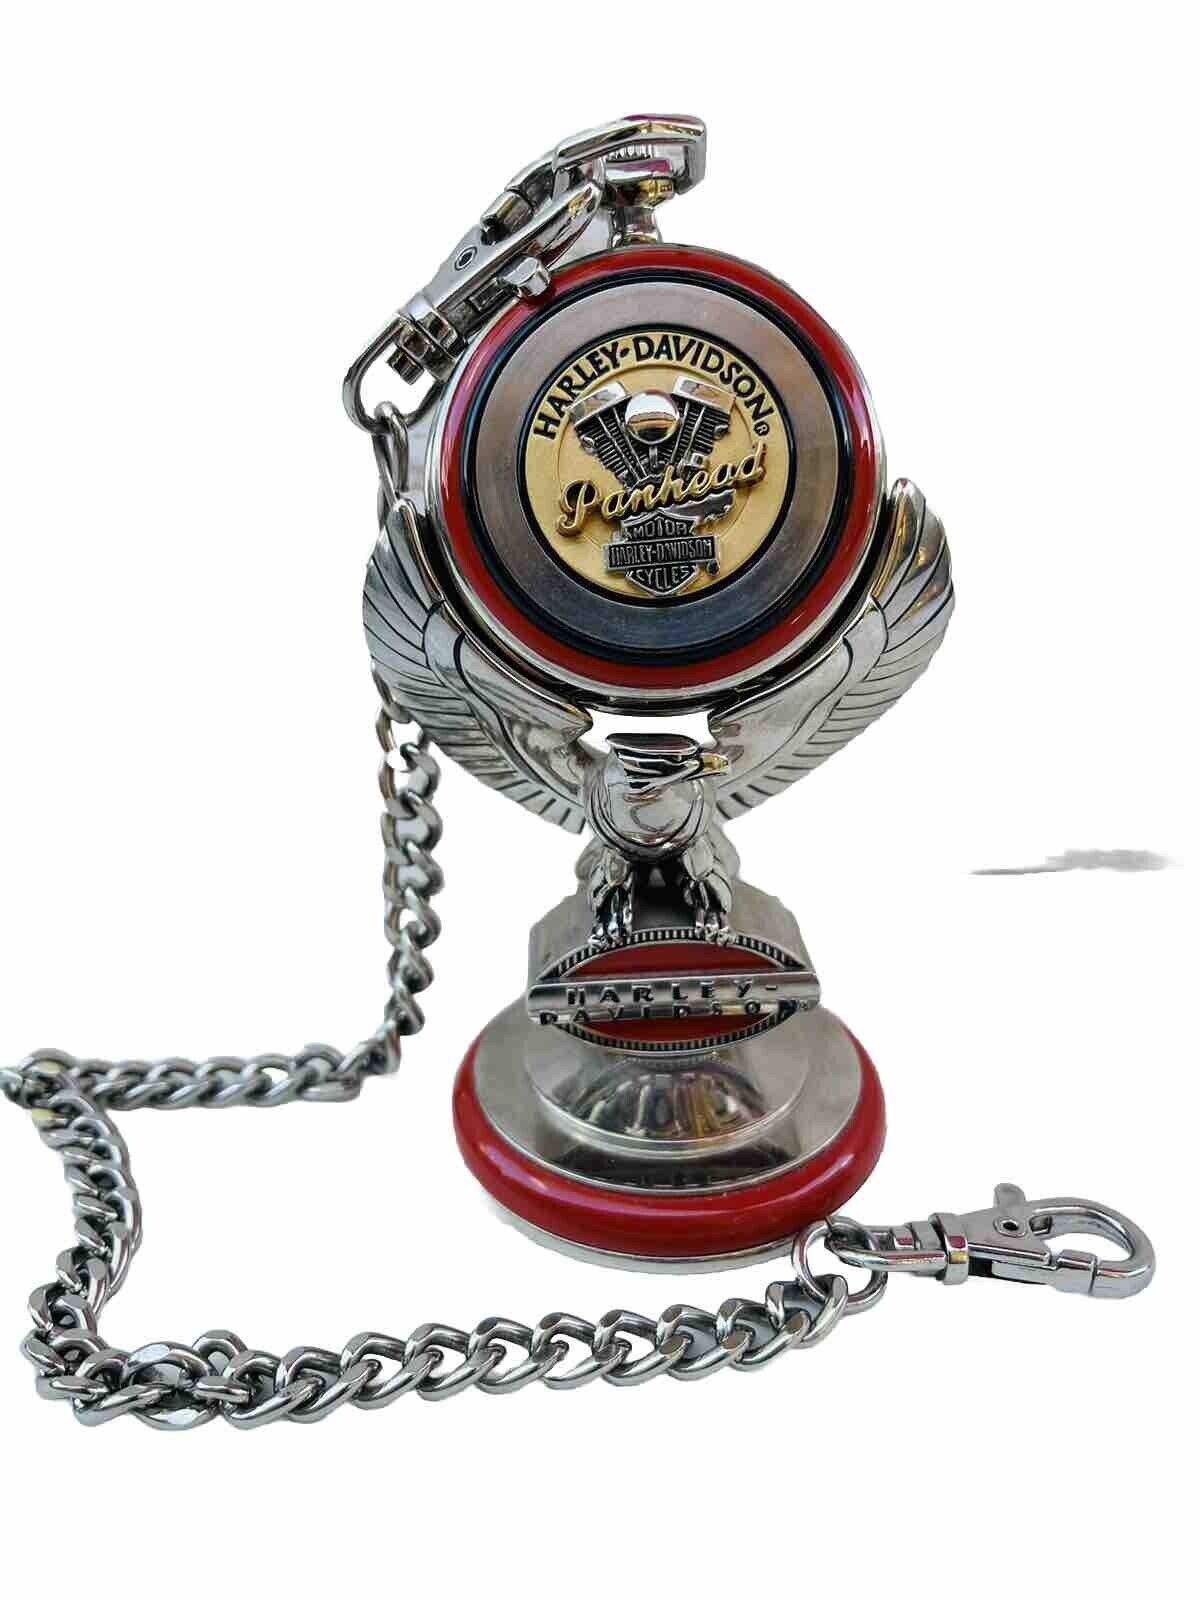 Franklin Mint Harley Davidson Panhead Pocket Watch Stand Chain Collectable